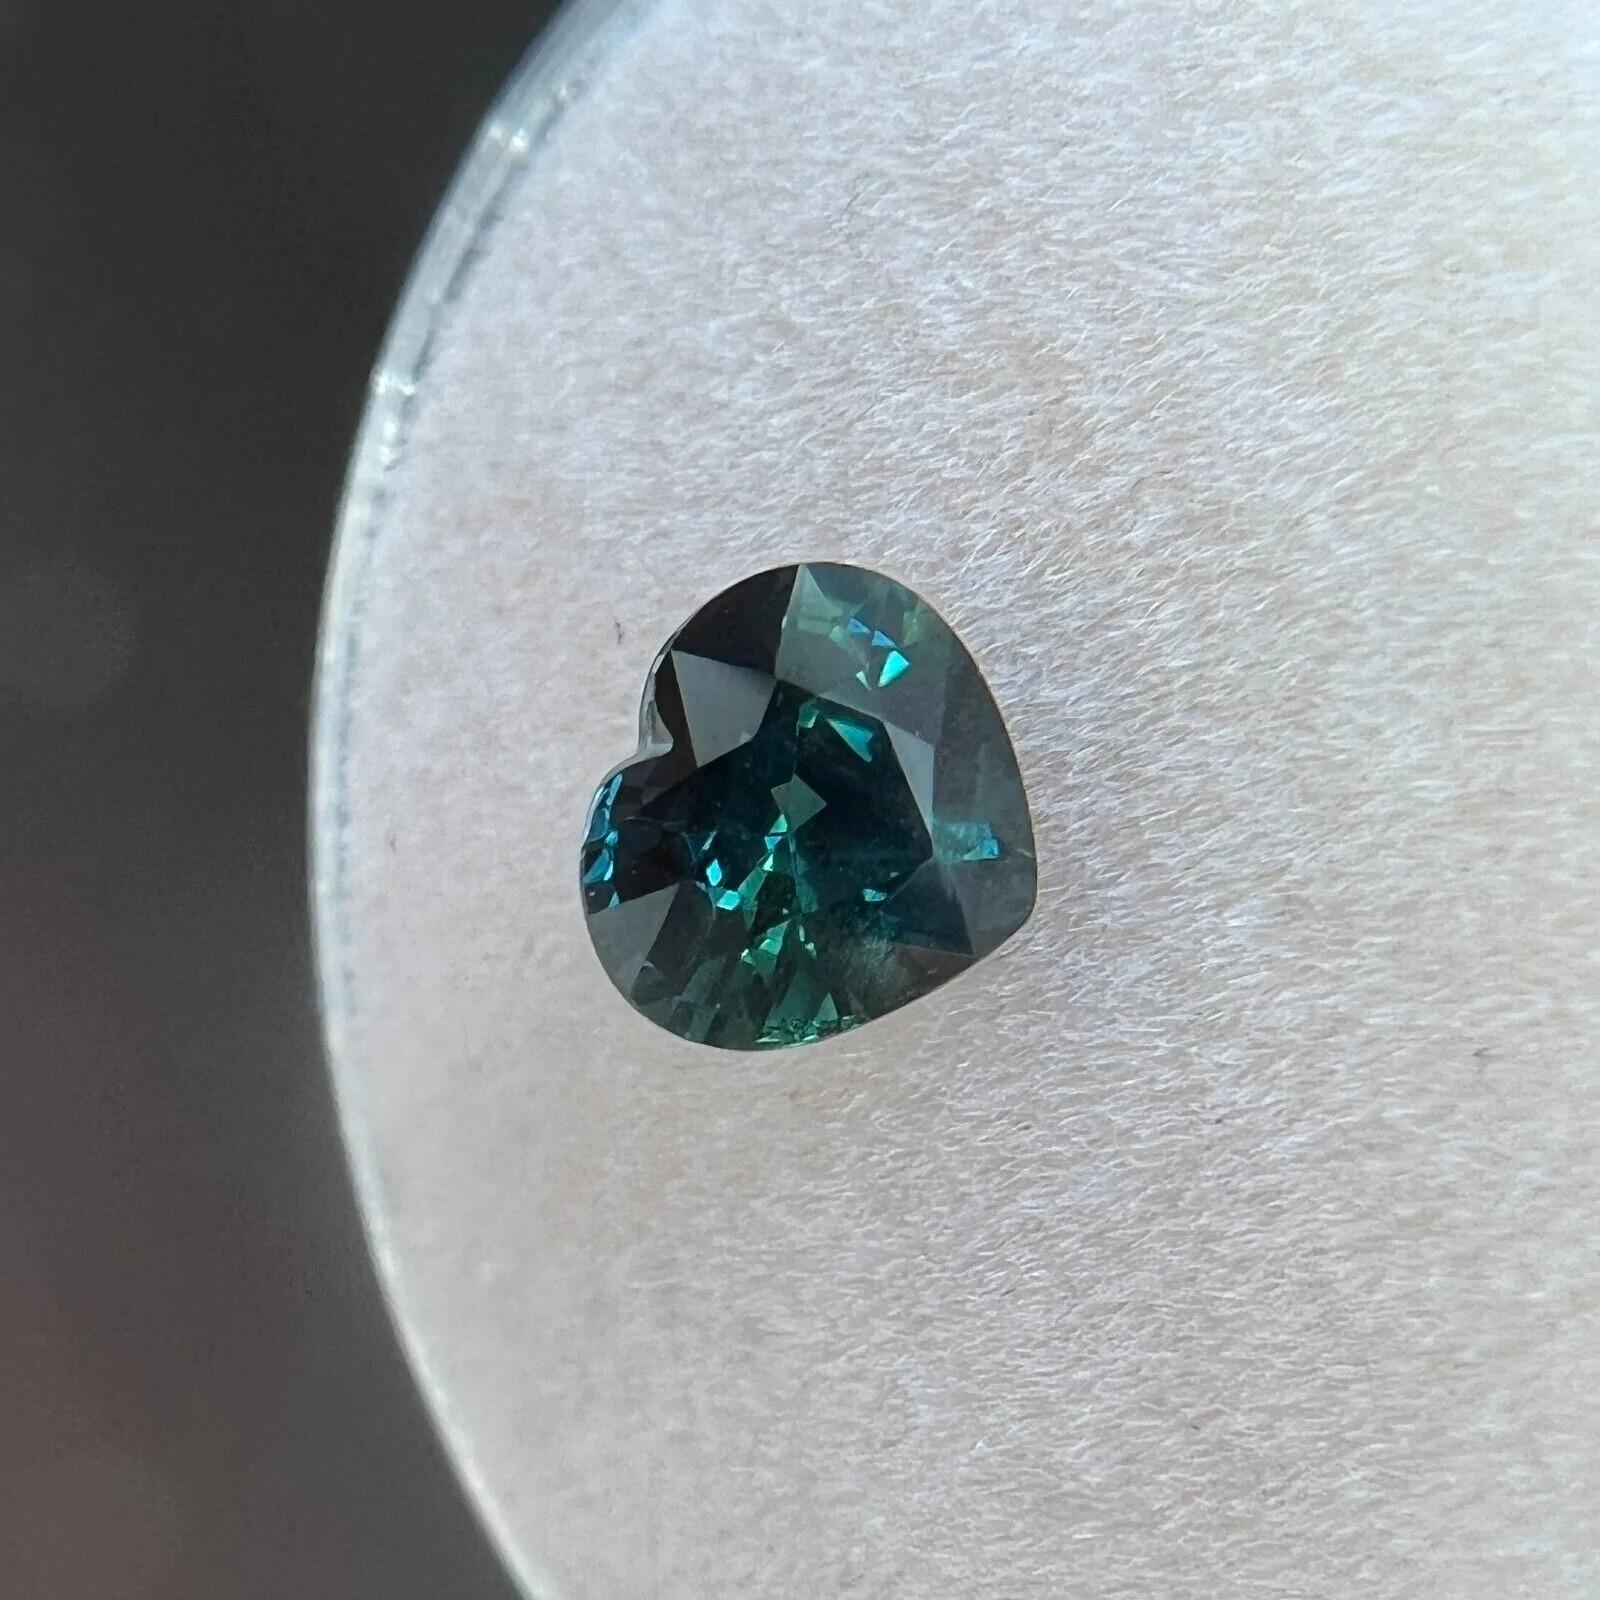 Untreated Natural Sapphire 1.16ct Fine Green Blue Teal Heart Cut Loose Gem VS

Natural Untreated Green Blue ‘Teal’ Australian Sapphire Gemstone. 
1.16 Carat with a beautiful and unique greenish blue teal colour. Also has excellent clarity, a very